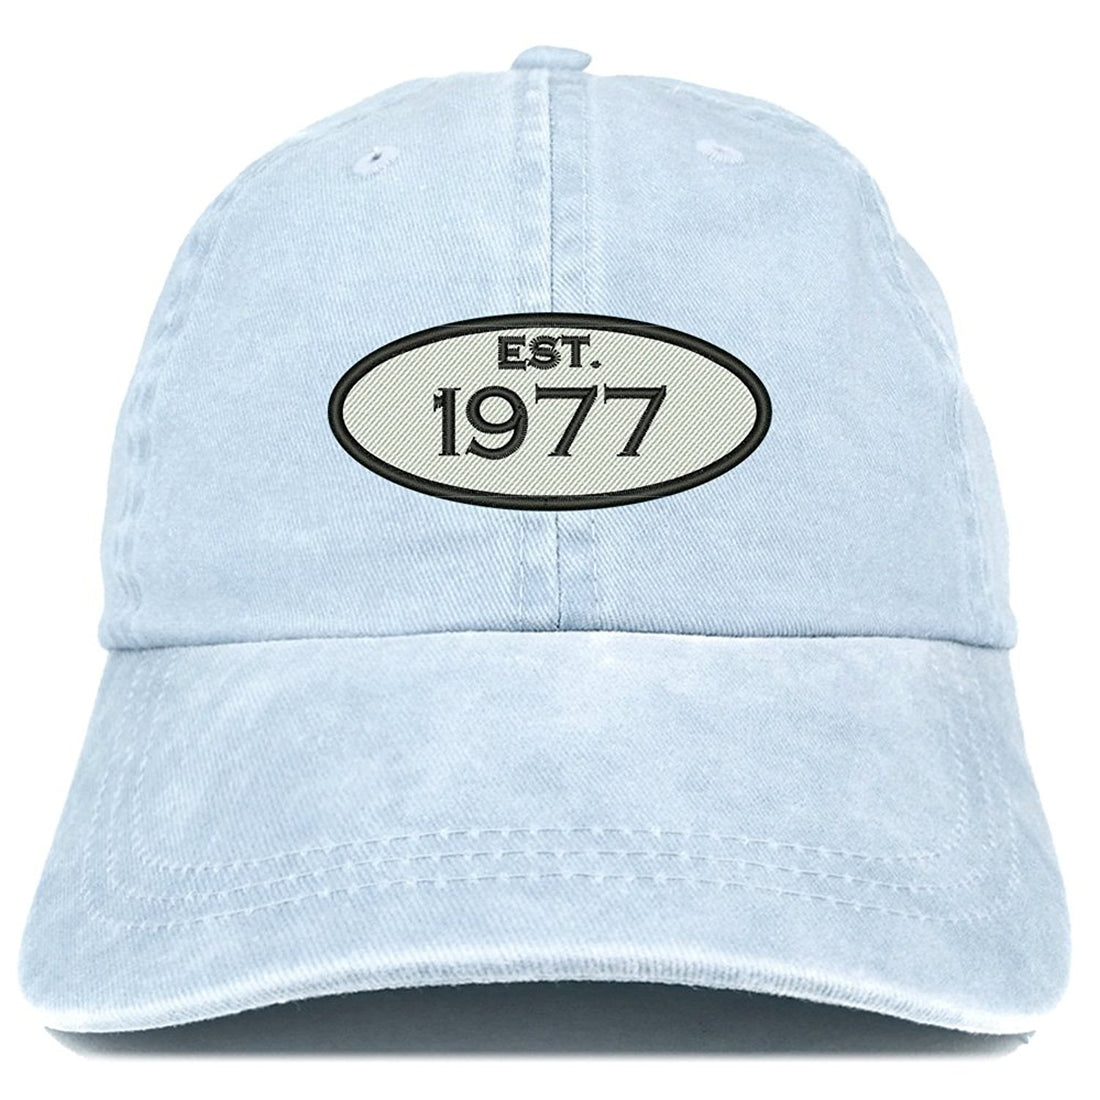 Trendy Apparel Shop Established 1977 Embroidered 42nd Birthday Gift Pigment Dyed Washed Cotton Cap